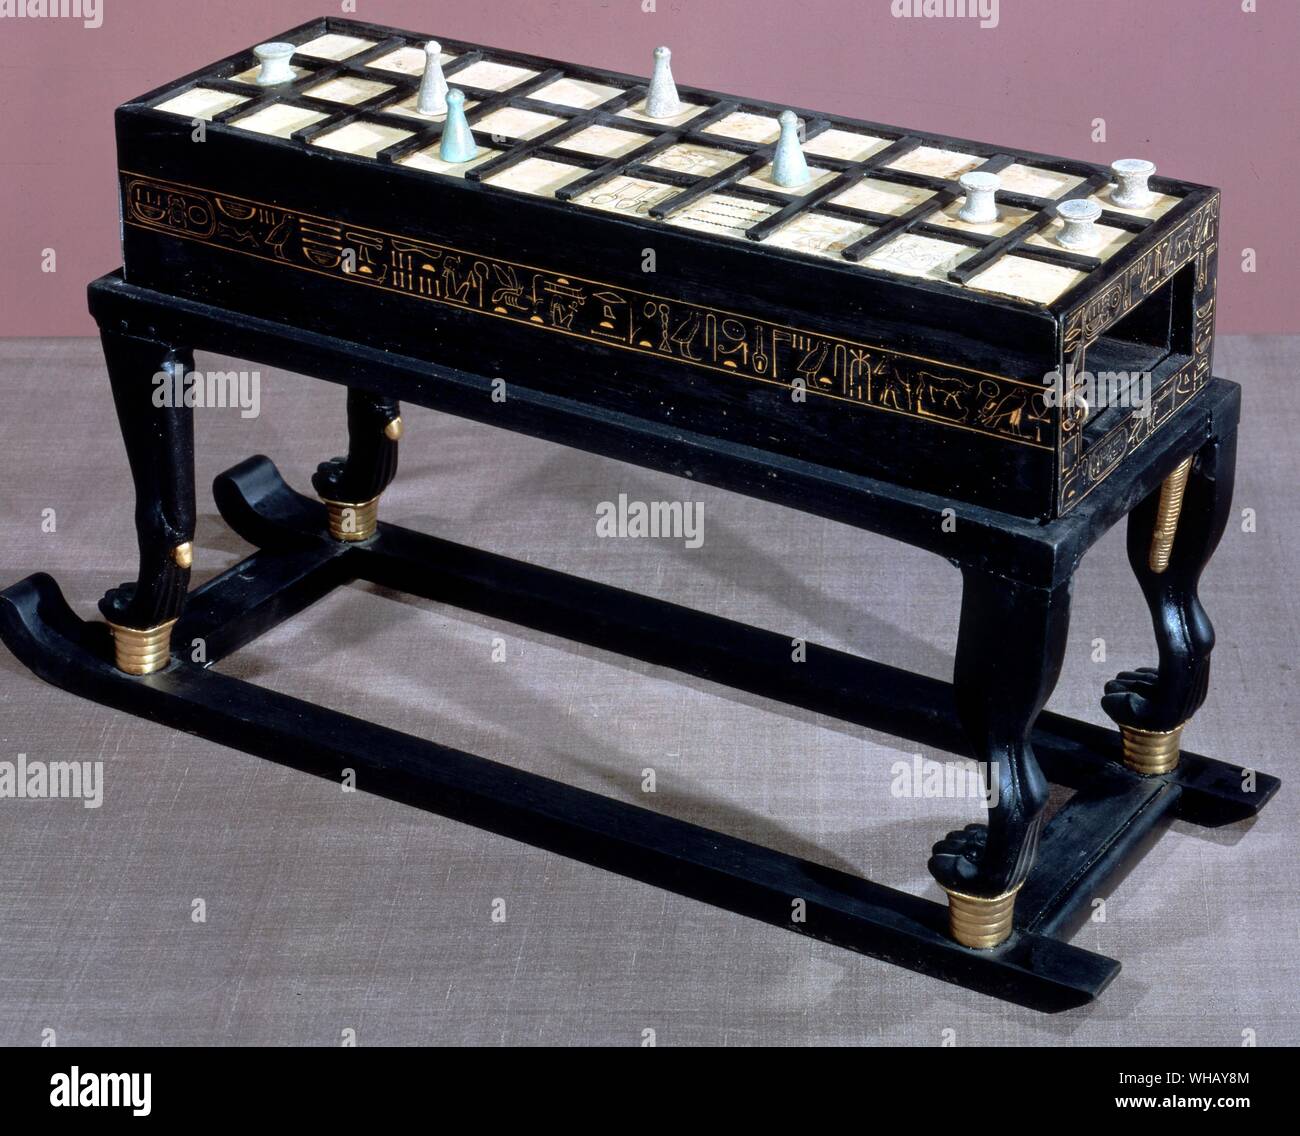 A game of Senet in ebony and ivory. This is the largest of three such objects found in the tomb. Tukankhamen, by Christiane Desroches Noblecourt, page 18.. This game table composed of interlocking pieces. The piece takes the form of a box resting on a base supported by four leonine legs, partially covered with gold leaf and fixed to a sledge. The upper surface is veneered with ivory and is subdivided by means of strips of wood into thirty squares, five of which carry inscriptions. The game of senet was played on this board. There are the same number of squares in ivory on the lower surface of Stock Photo